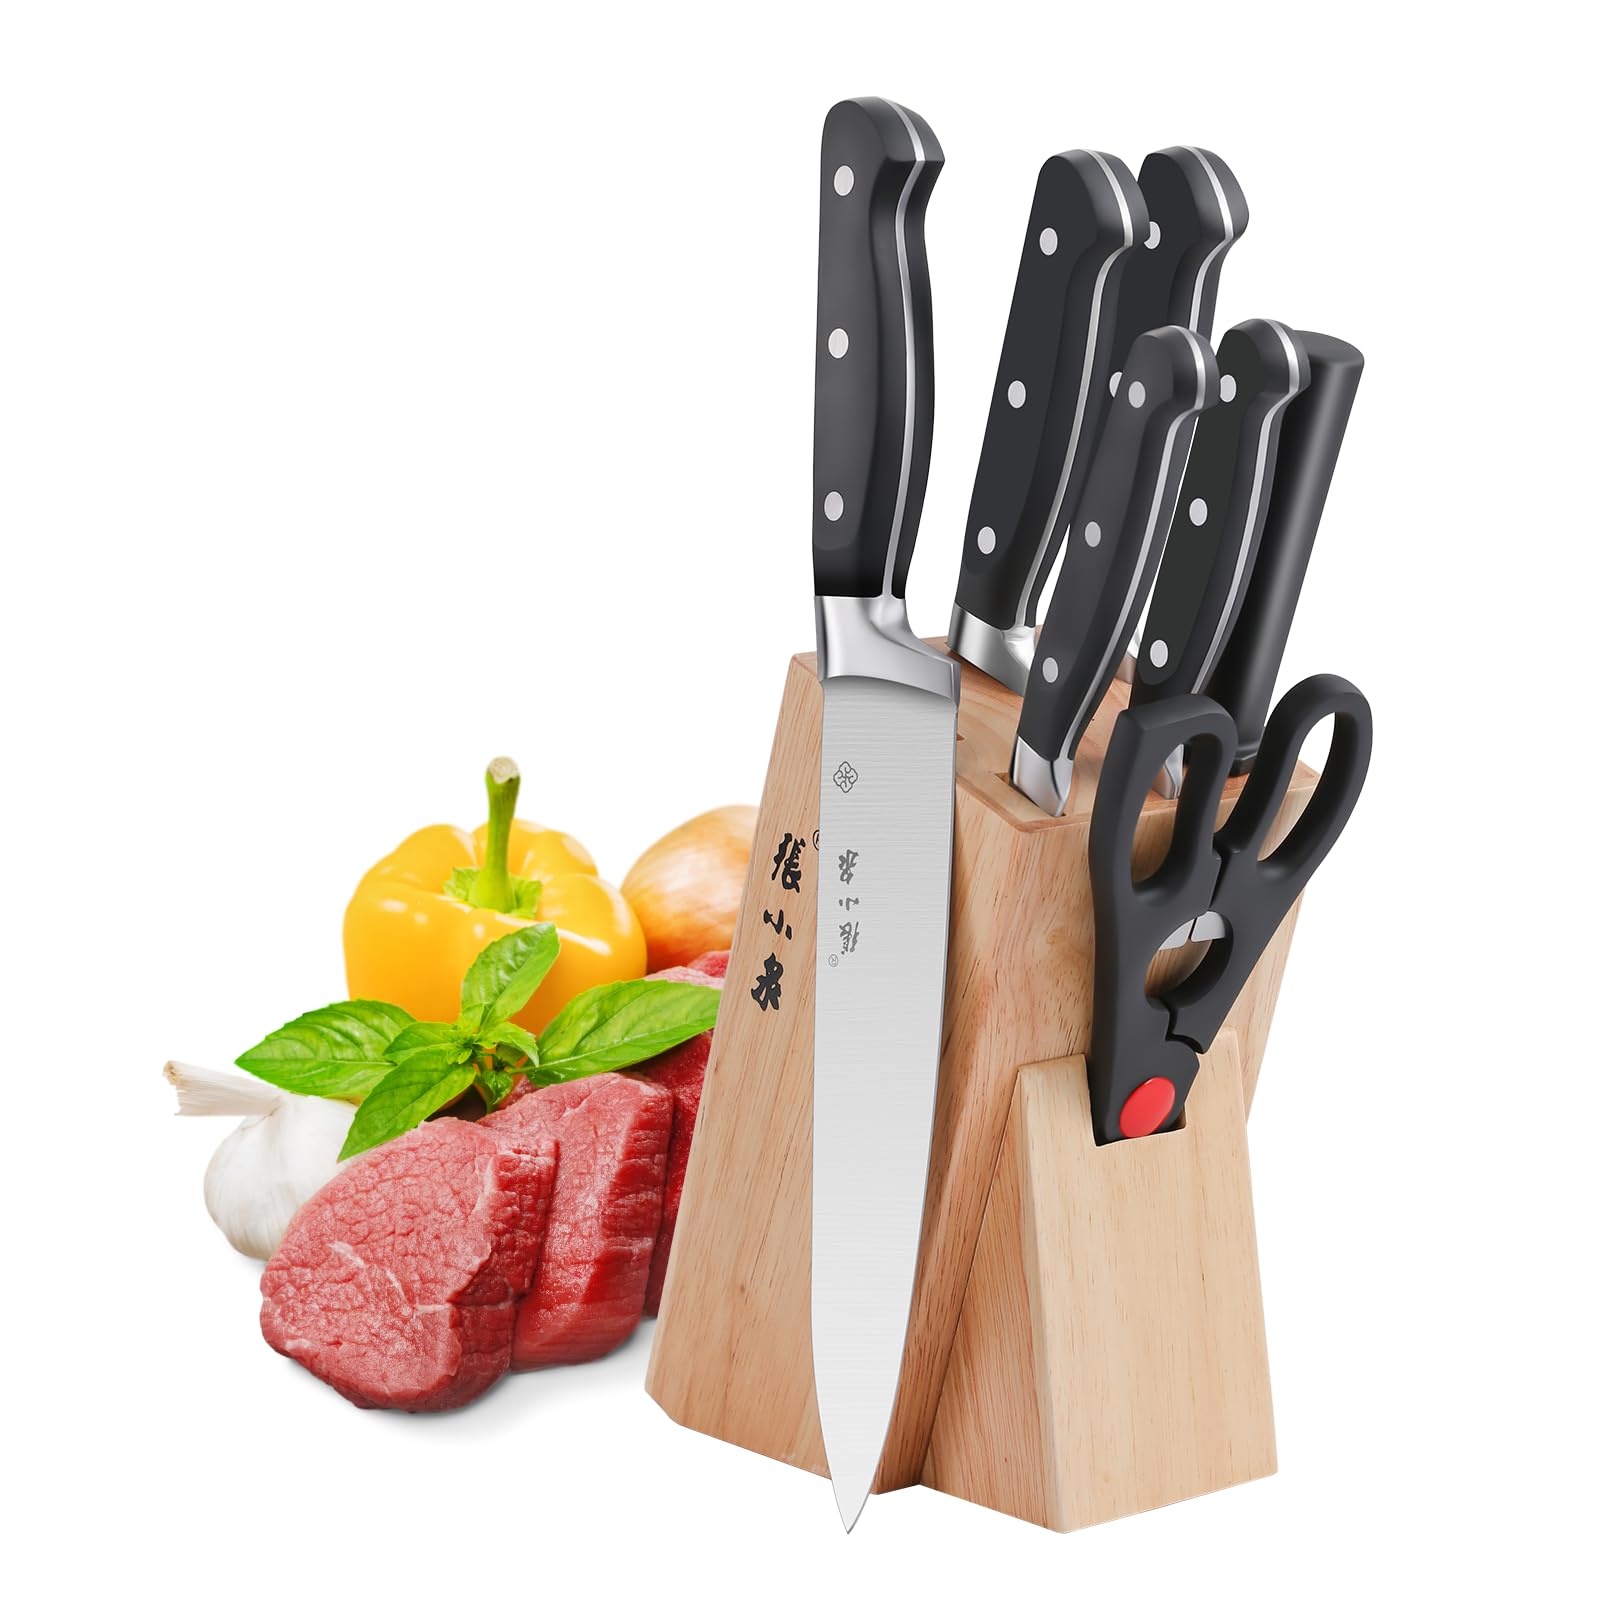 ZHANG XIAO QUAN Chinese Cleaver Chef Knife Kitchen Meat Cleaver - 9" Stainless Steel Chopping Knife for Meat Cutting - Safe Non-stick Coating Blade - Full Tang Anti-Slip Pear Wooden Handle